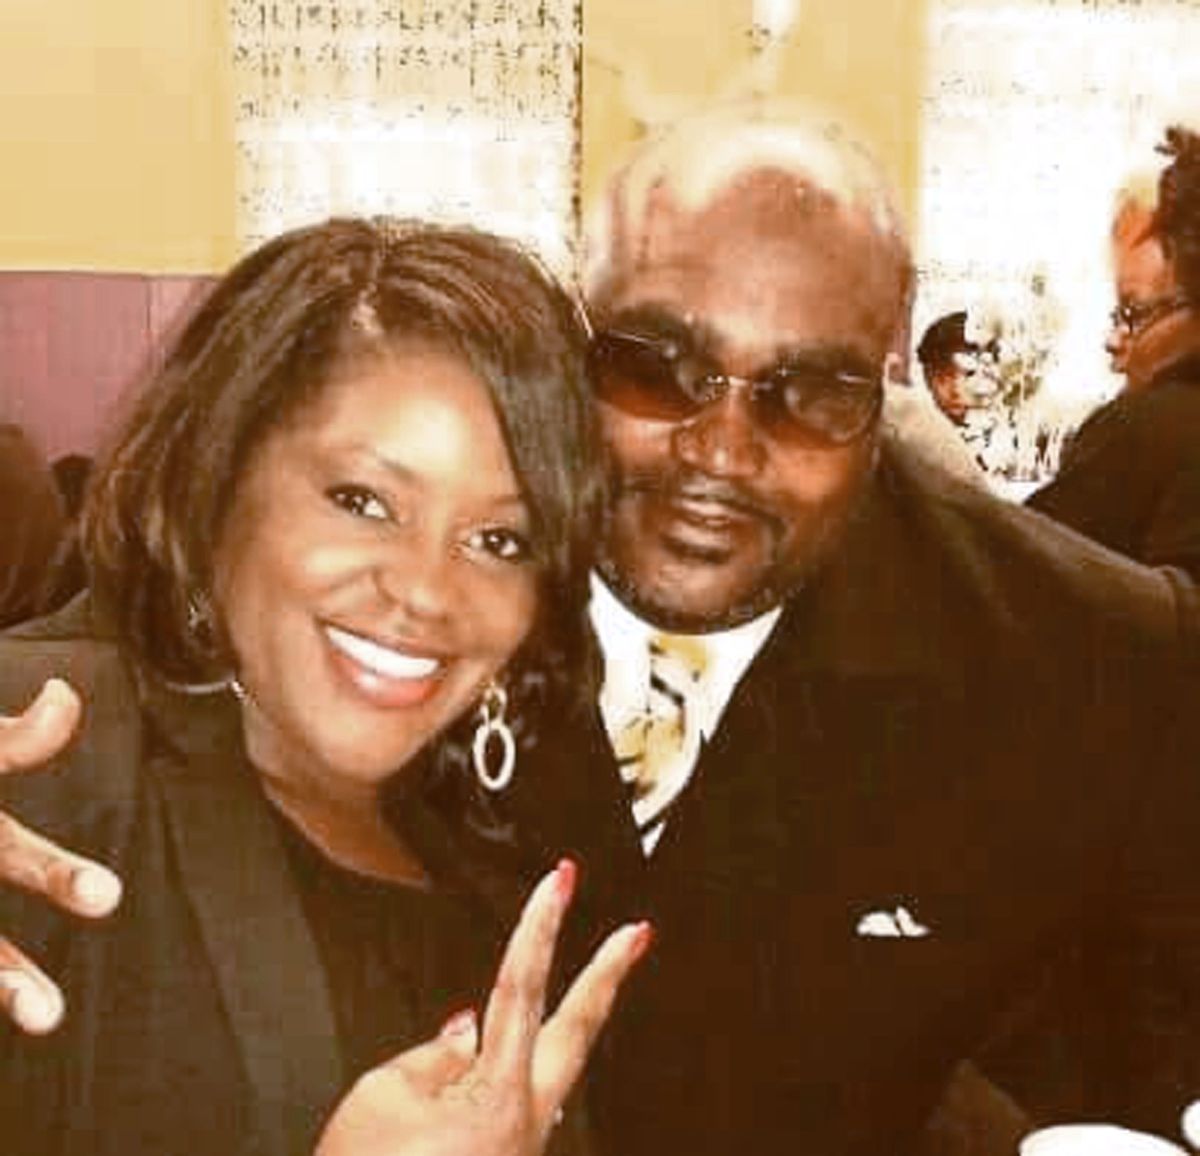 FILE - This undated photo provided by the Parks &amp; Crump, LLC shows Terence Crutcher, right, with his twin sister Tiffany. Crutcher, an unarmed black man was killed by a white Oklahoma officer Friday, Sept. 16, 2016, who was responding to a stalled vehicle. (Courtesy of Crutcher Family/Parks &amp; Crump, LLC via AP, File) (AP)